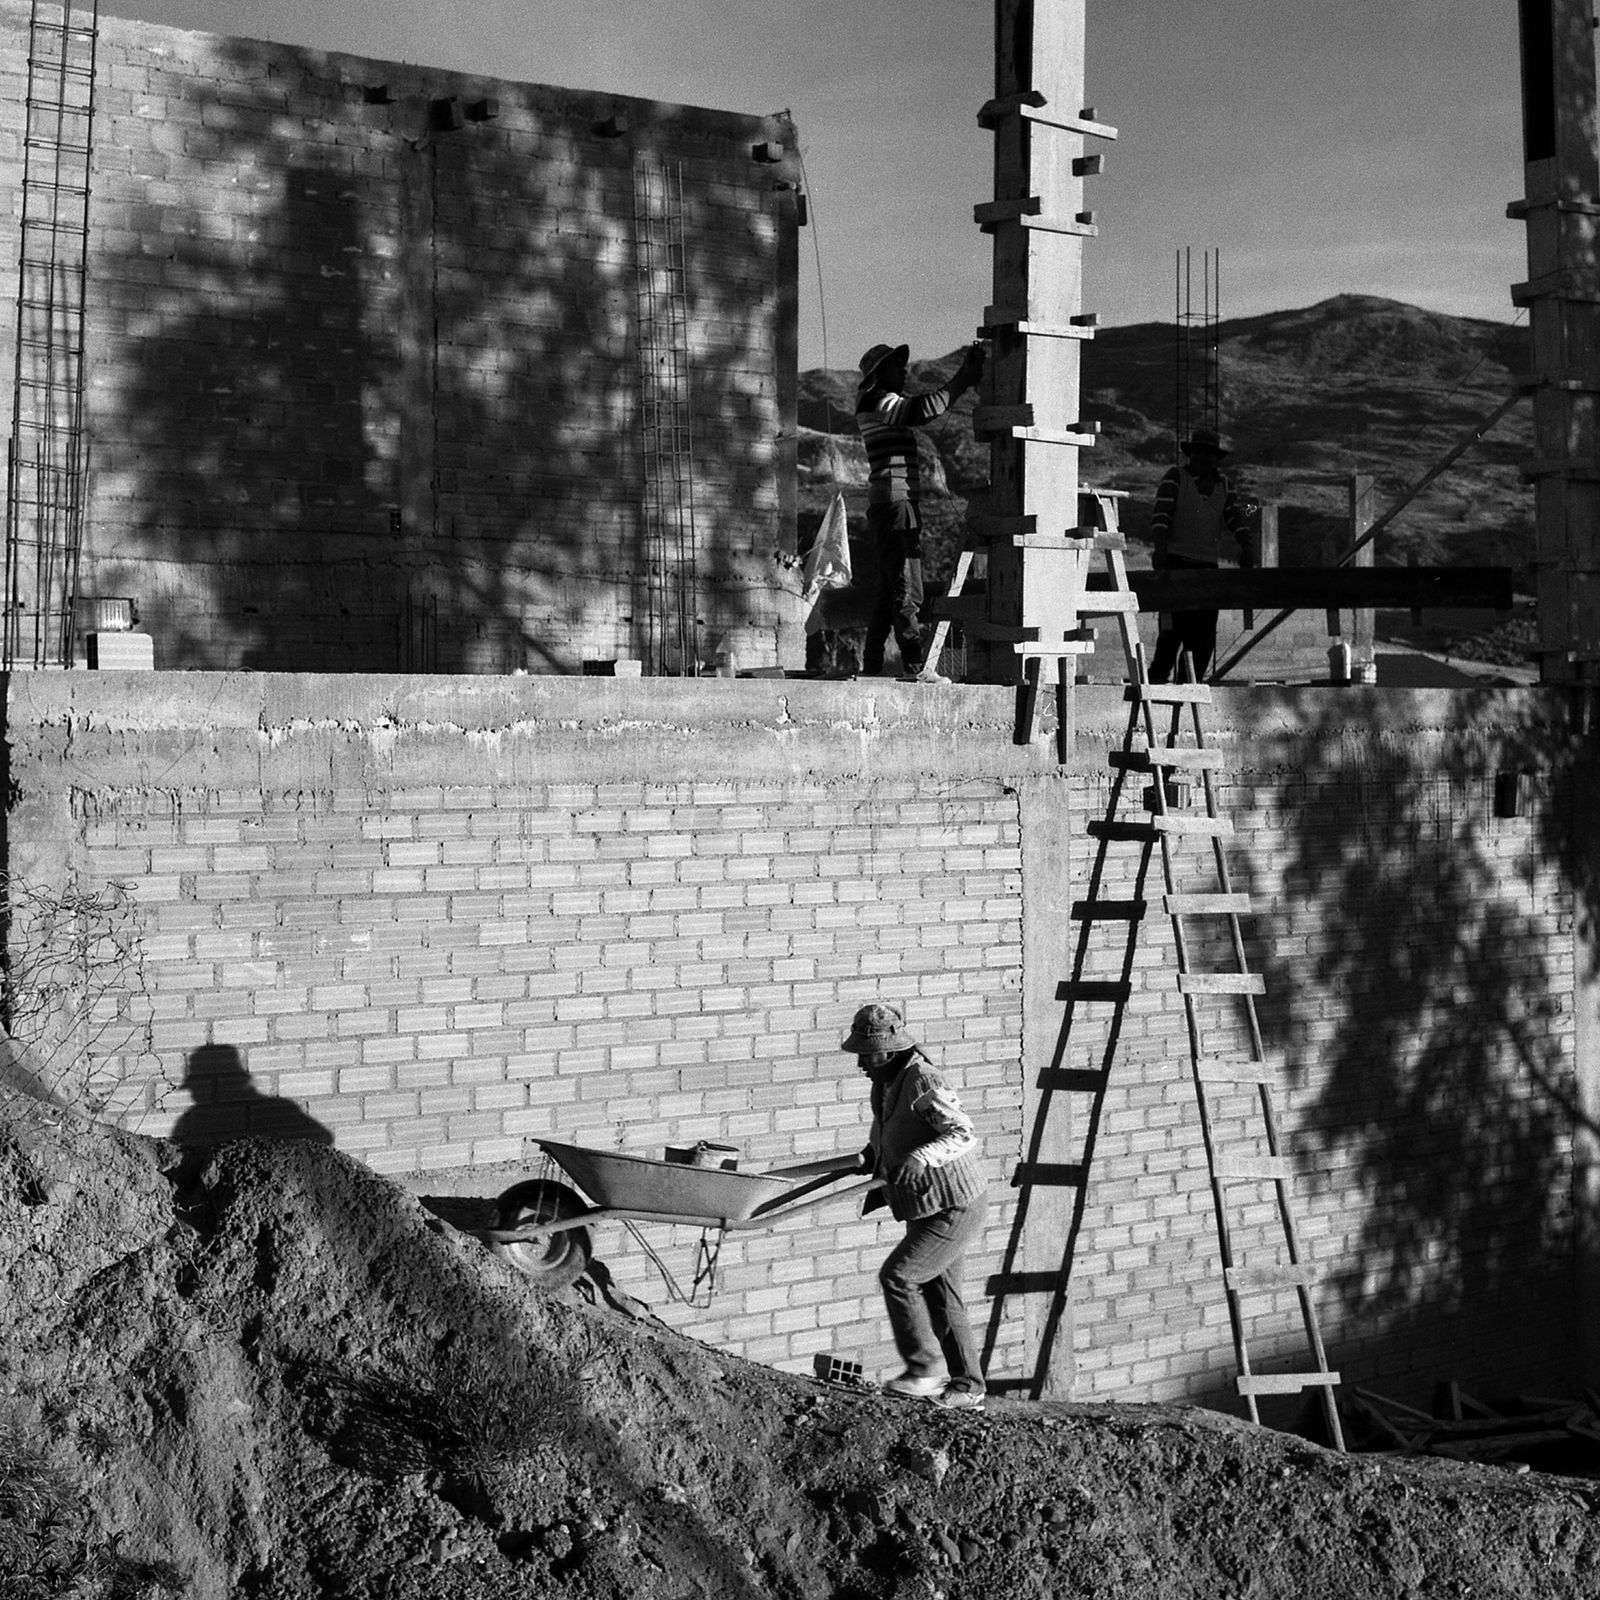 © Sofia Bensadon - Image from the "50 kg" - Woman Builders in La Paz City, Bolivia photography project